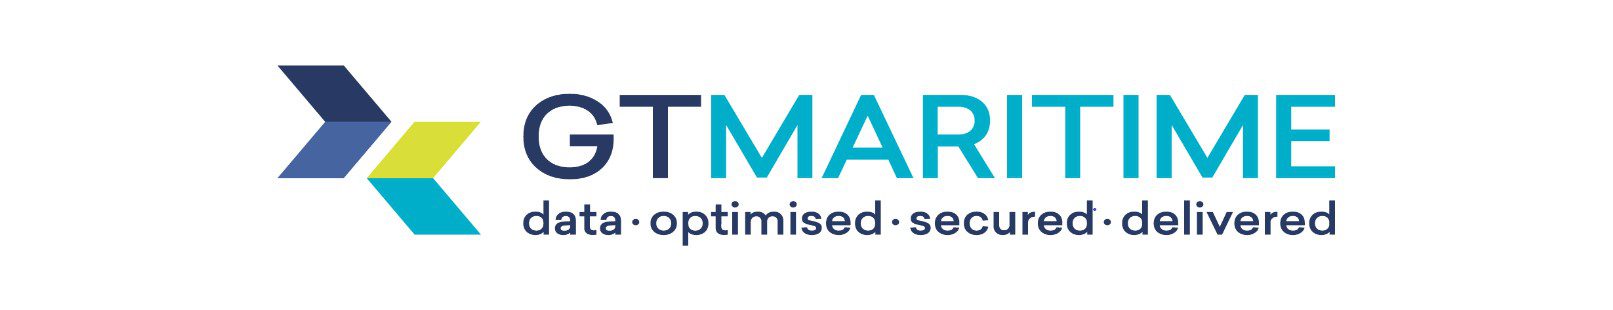 GTMaritime Announces Move to Employee Ownership